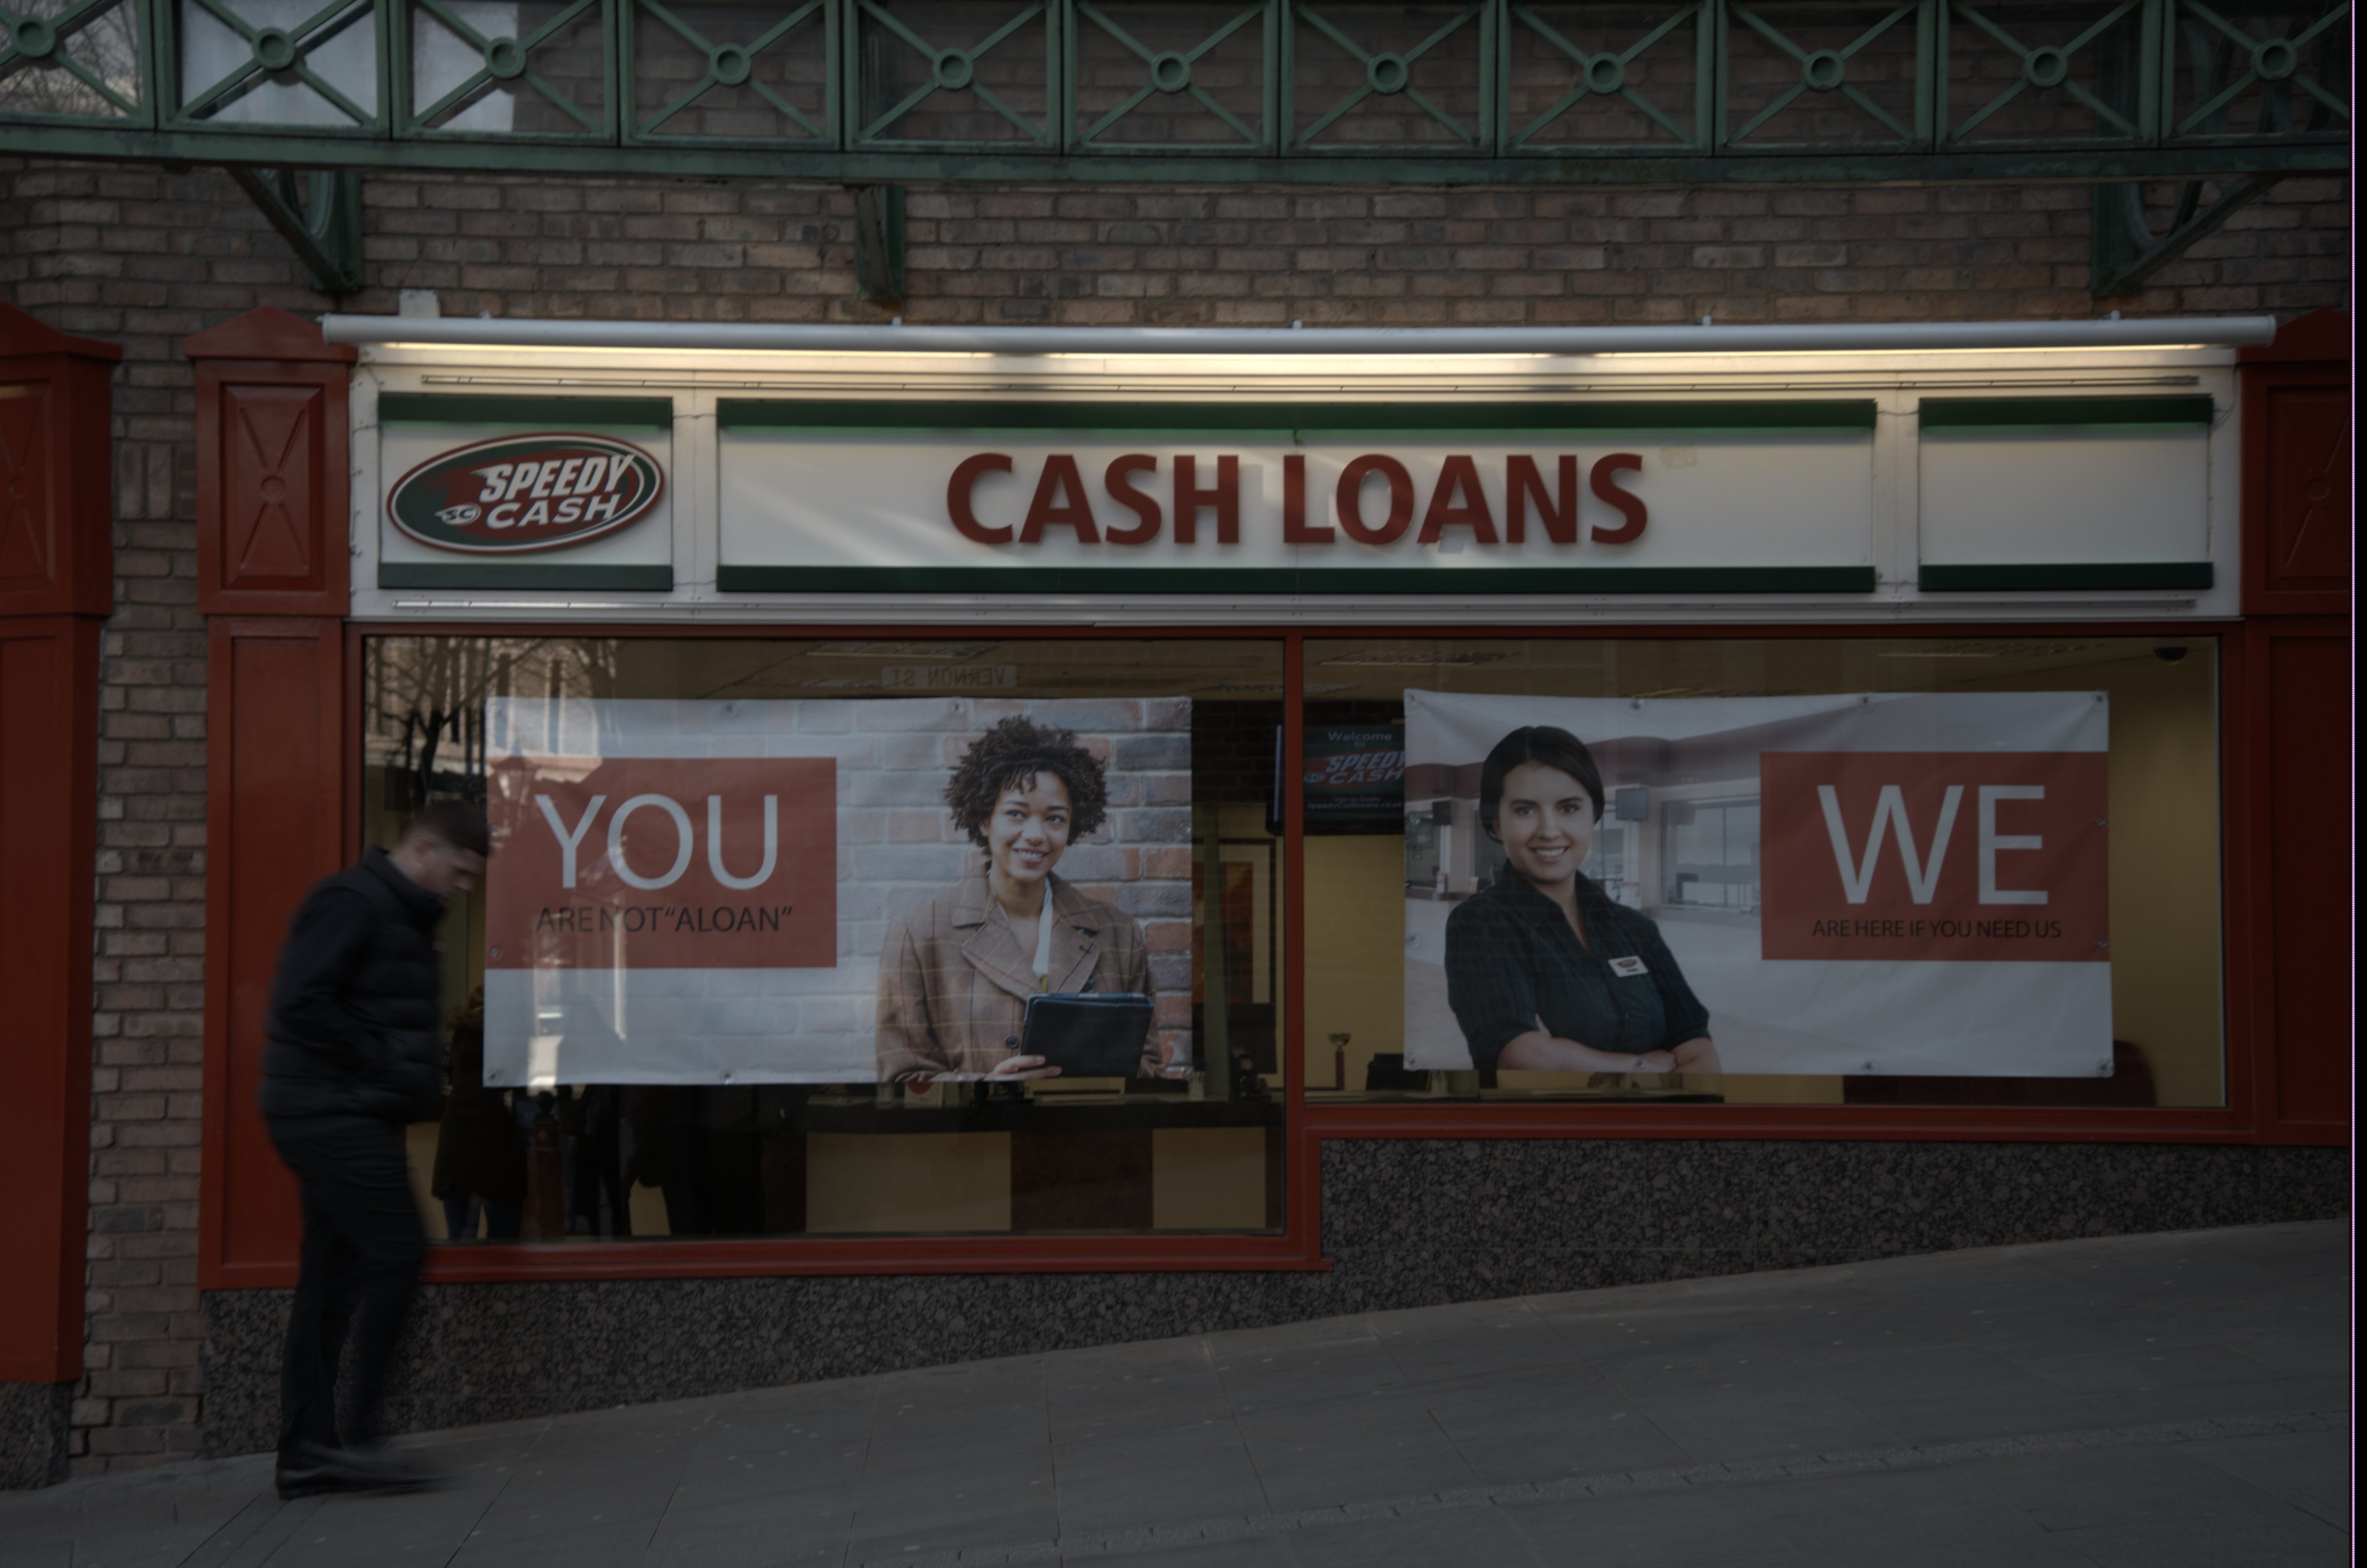 Speedy Cash, a provider of payday loans, trading in Stockport on March 10, 2015. (Jonathan Nicholson—NurPhoto/Getty Images)